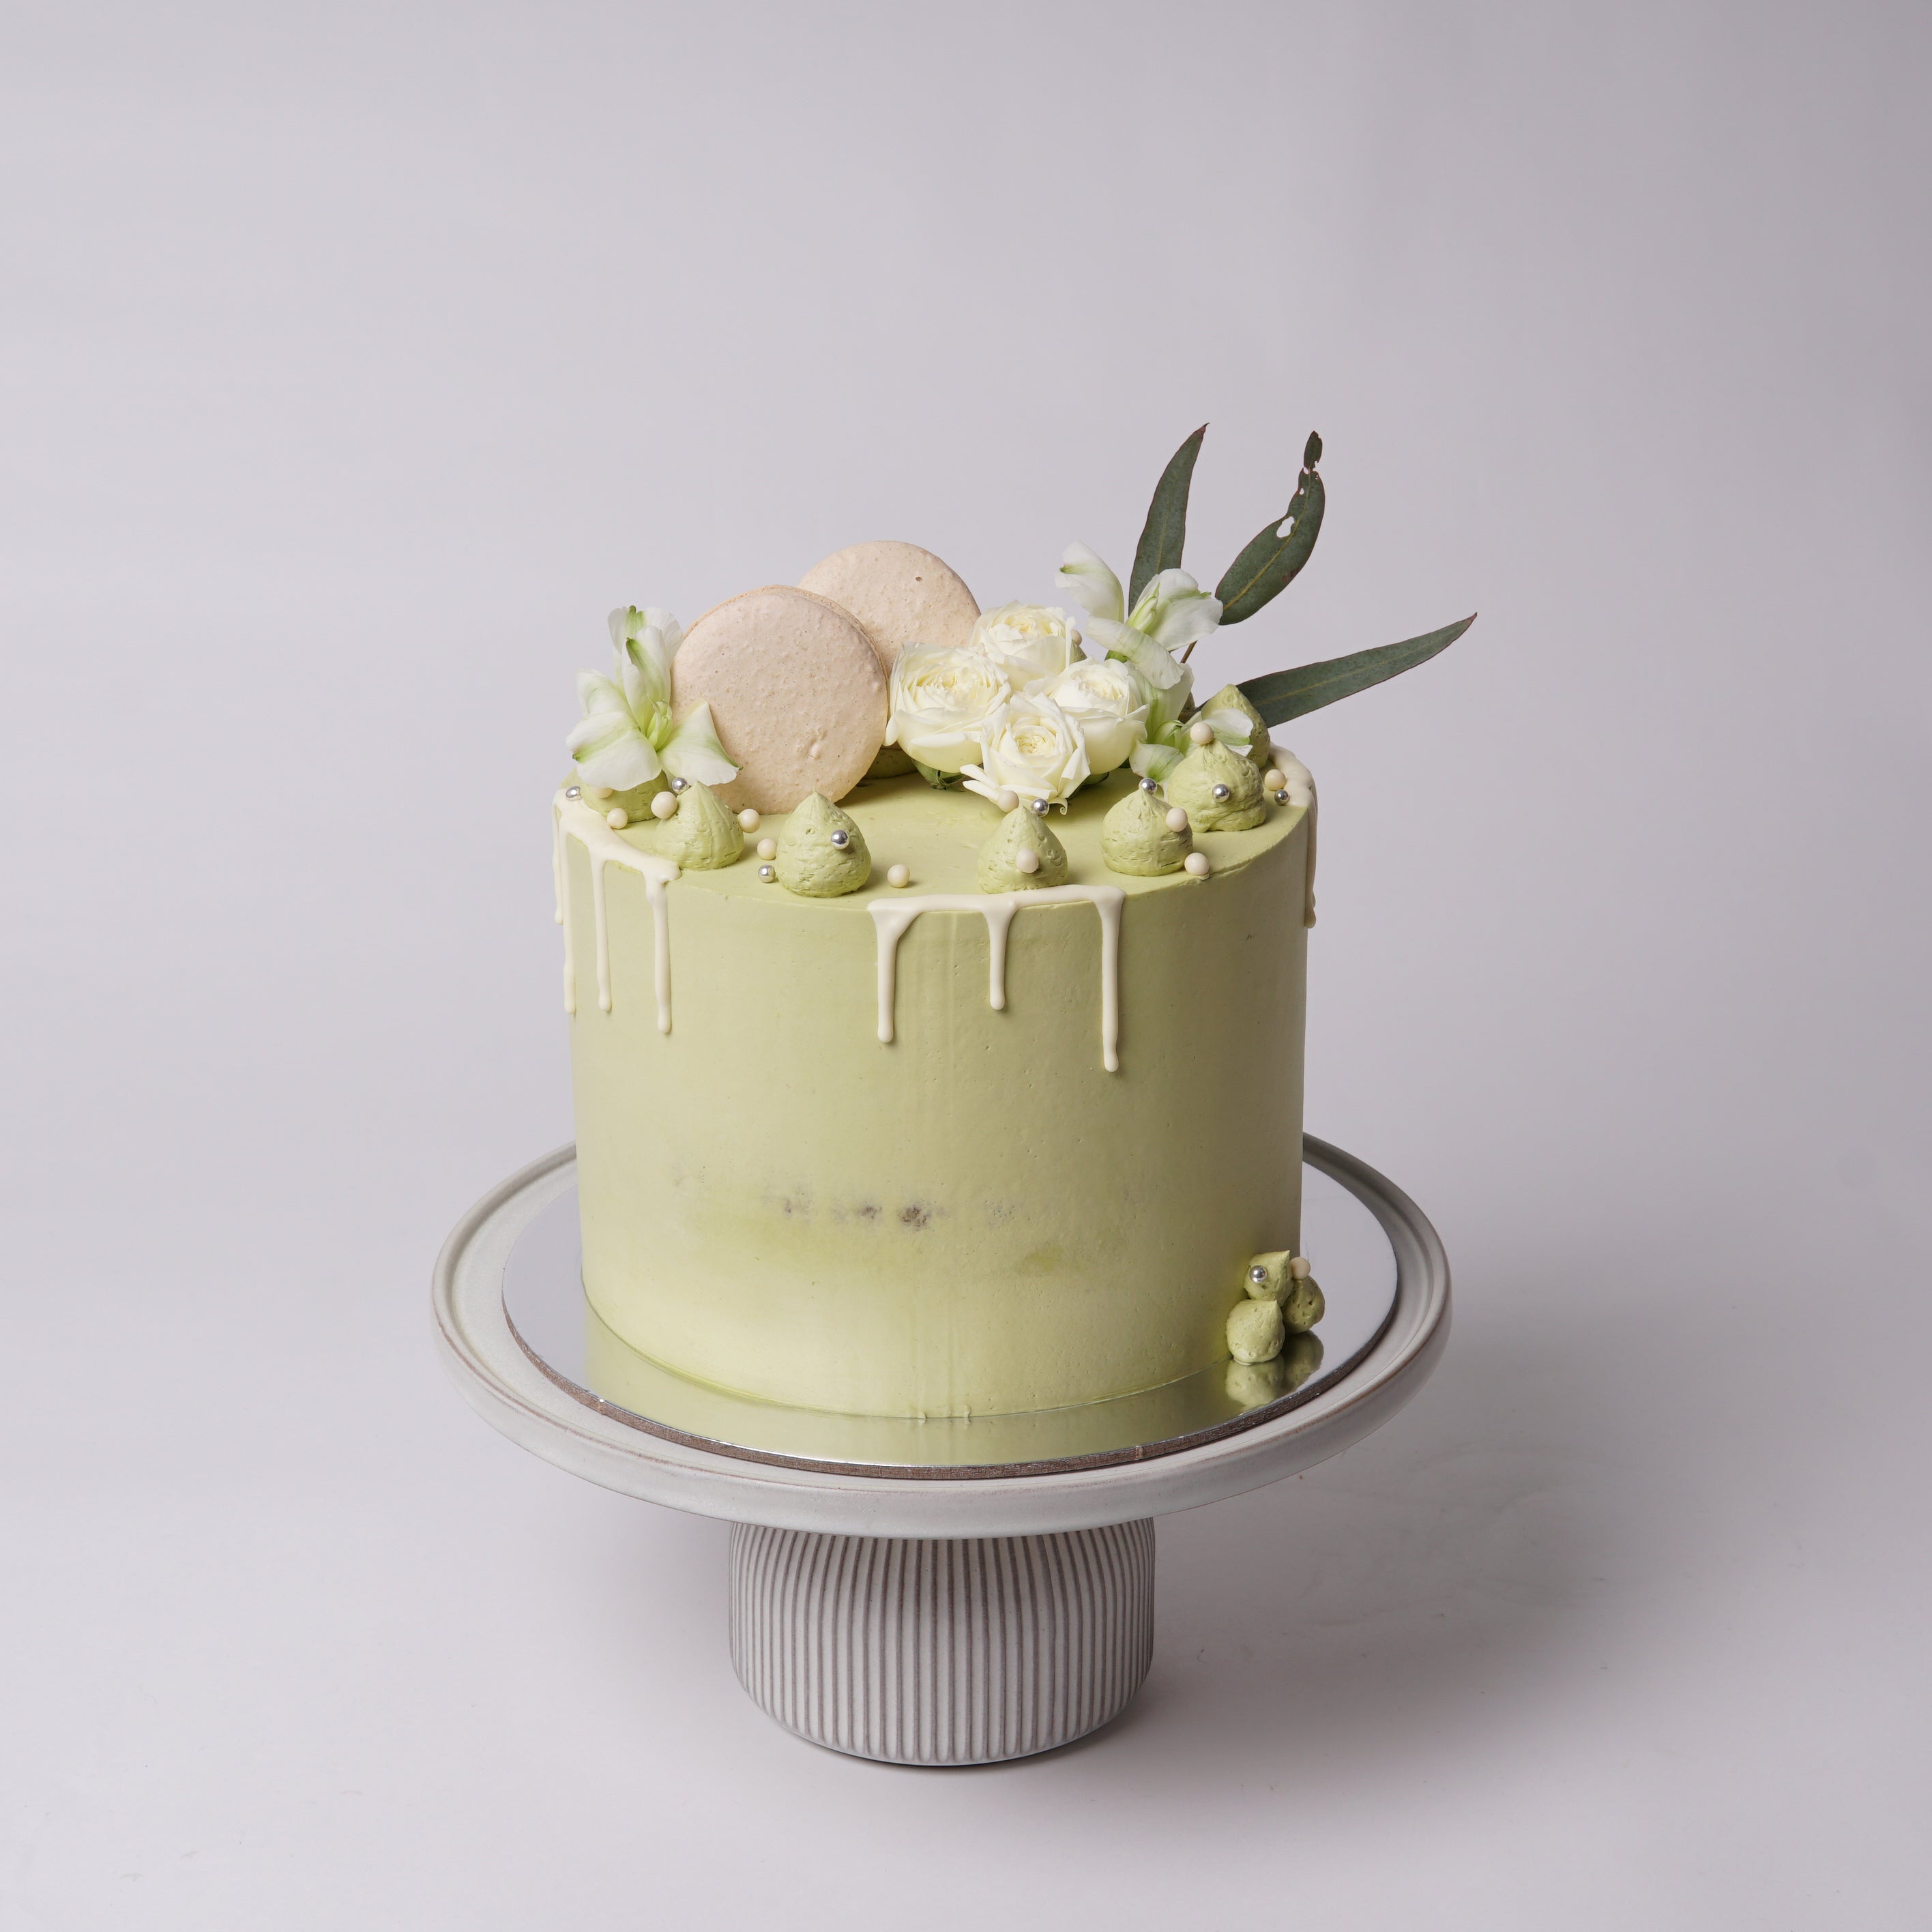 Our Signature Double Tier Millé Crepe Cake for special occasions 〰️ This  one is in Matcha & Adzuki and fresh florals 🌸 Our custom cakes … |  Instagram